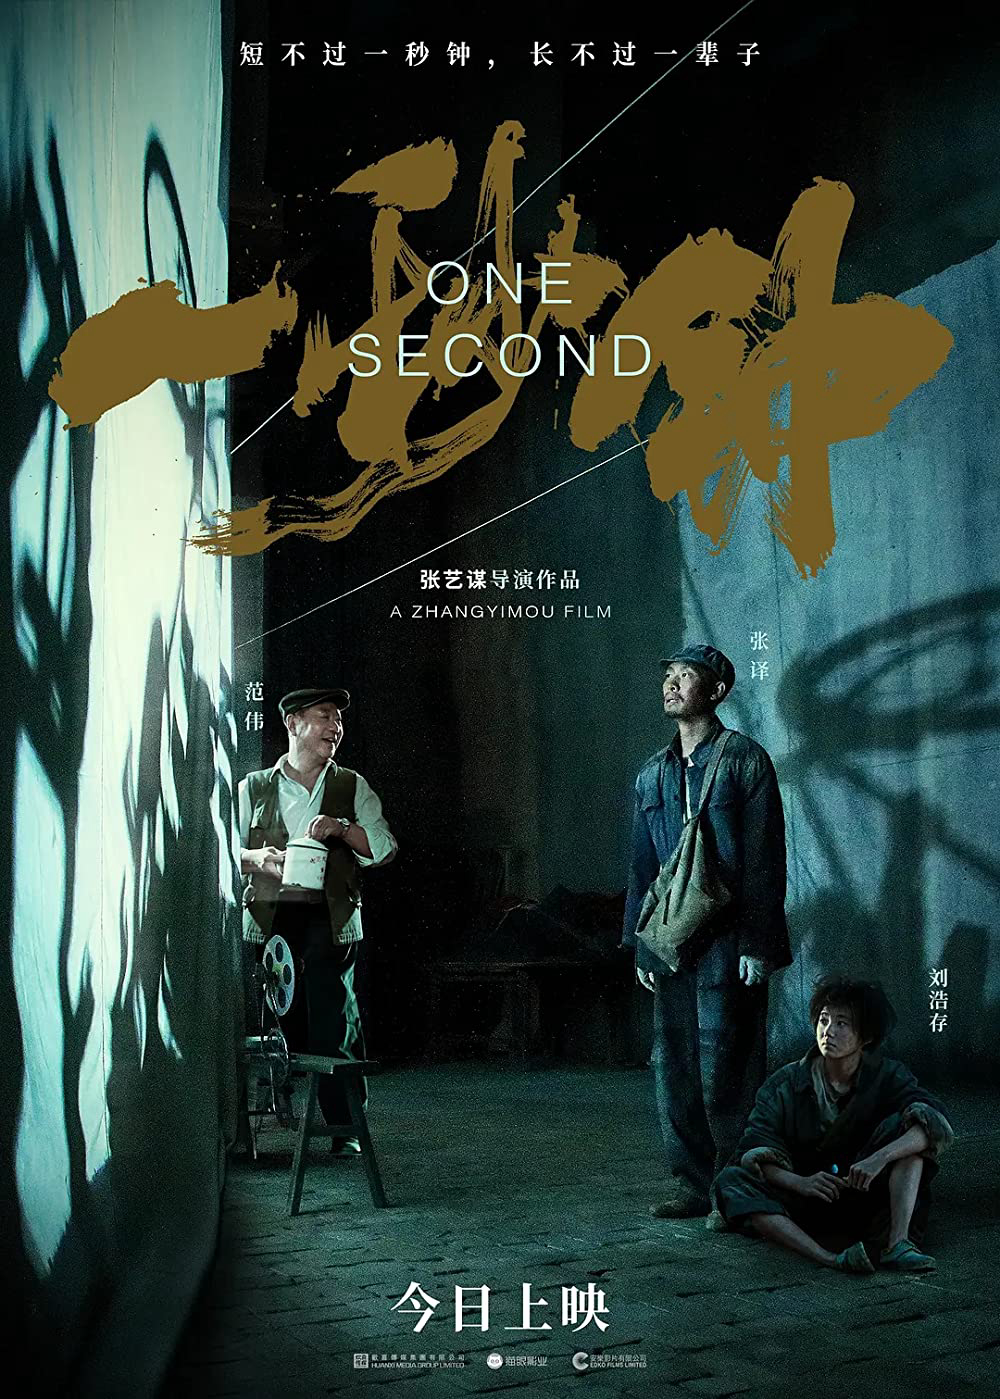 Poster Phim MỘT GIÂY (One Second)